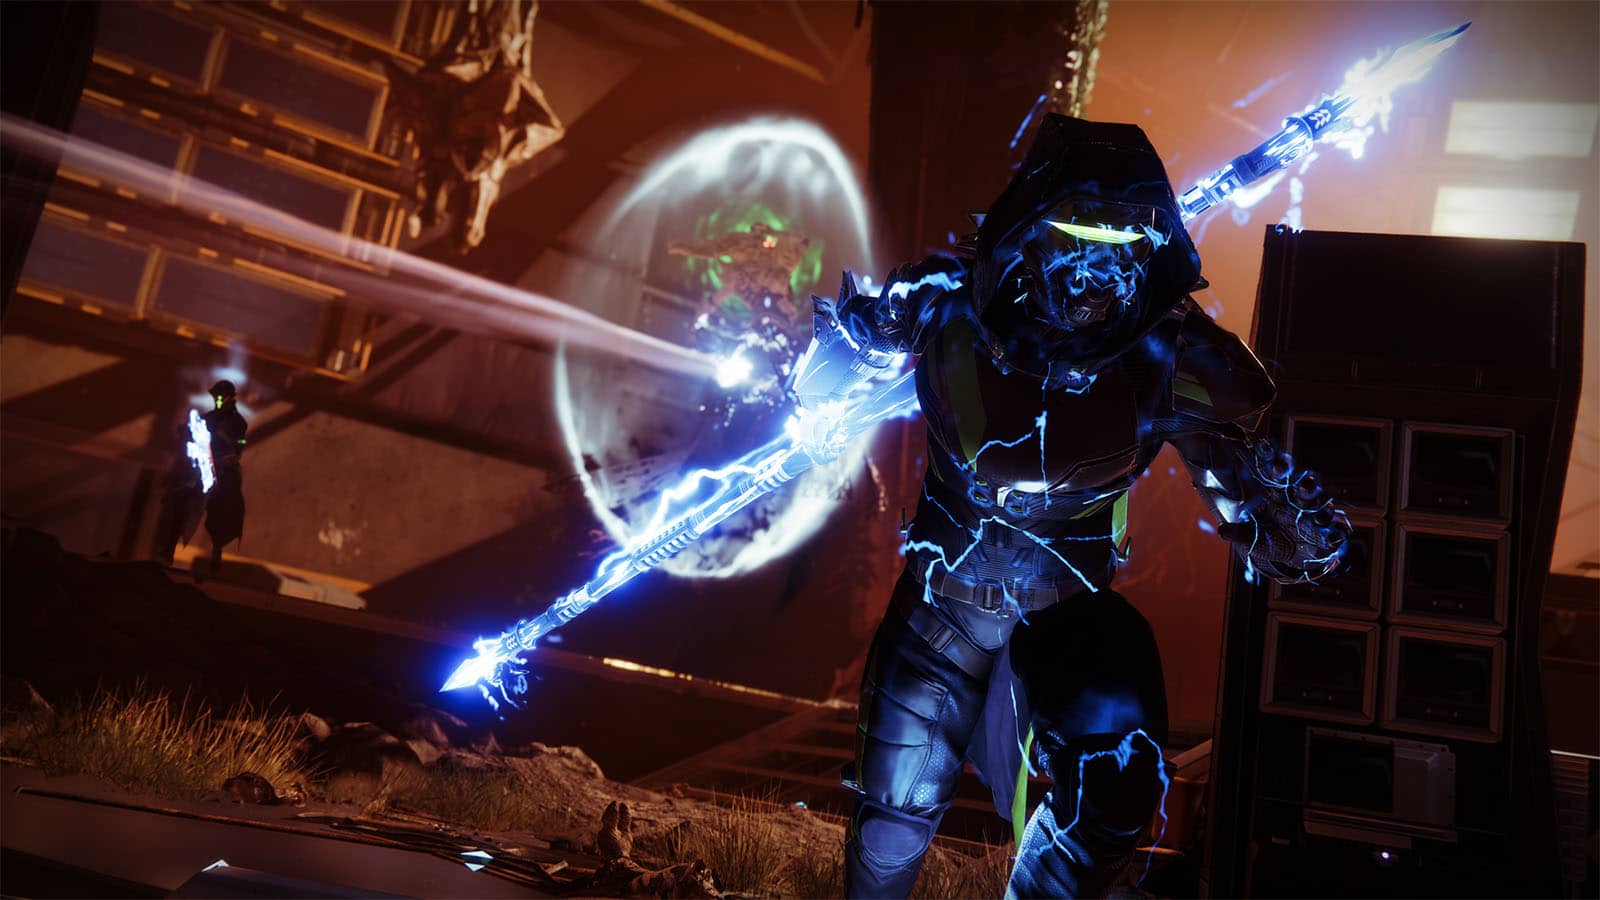 Bungie Steps In To Restore Deleted Destiny 2 Character For Player Caught In Bizarre Bug